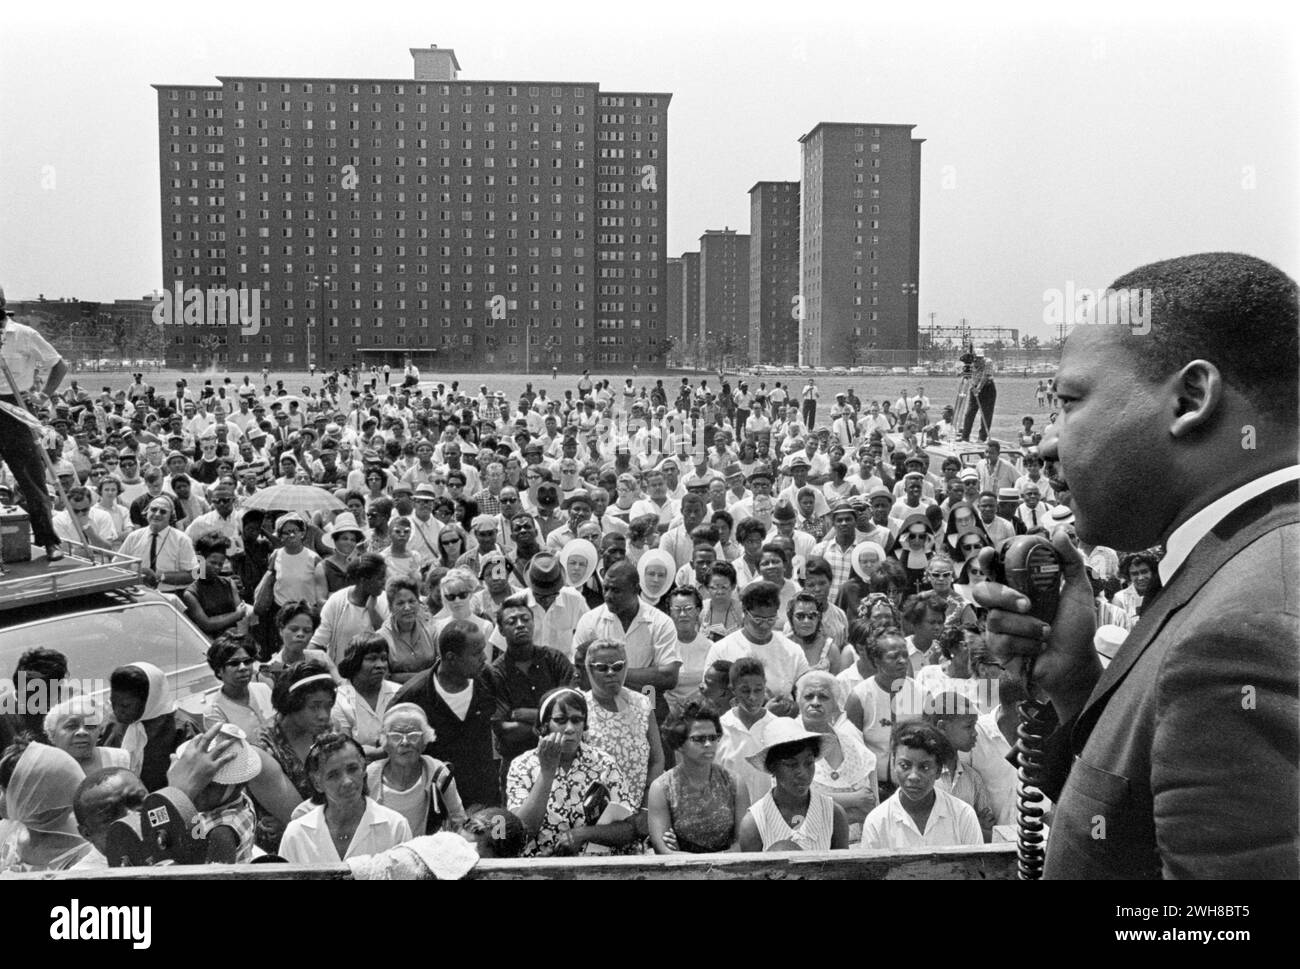 Dr King Speaking to Crowd During a Peaceful Civil Rights Protest in the 1960s in Chicago Stock Photo